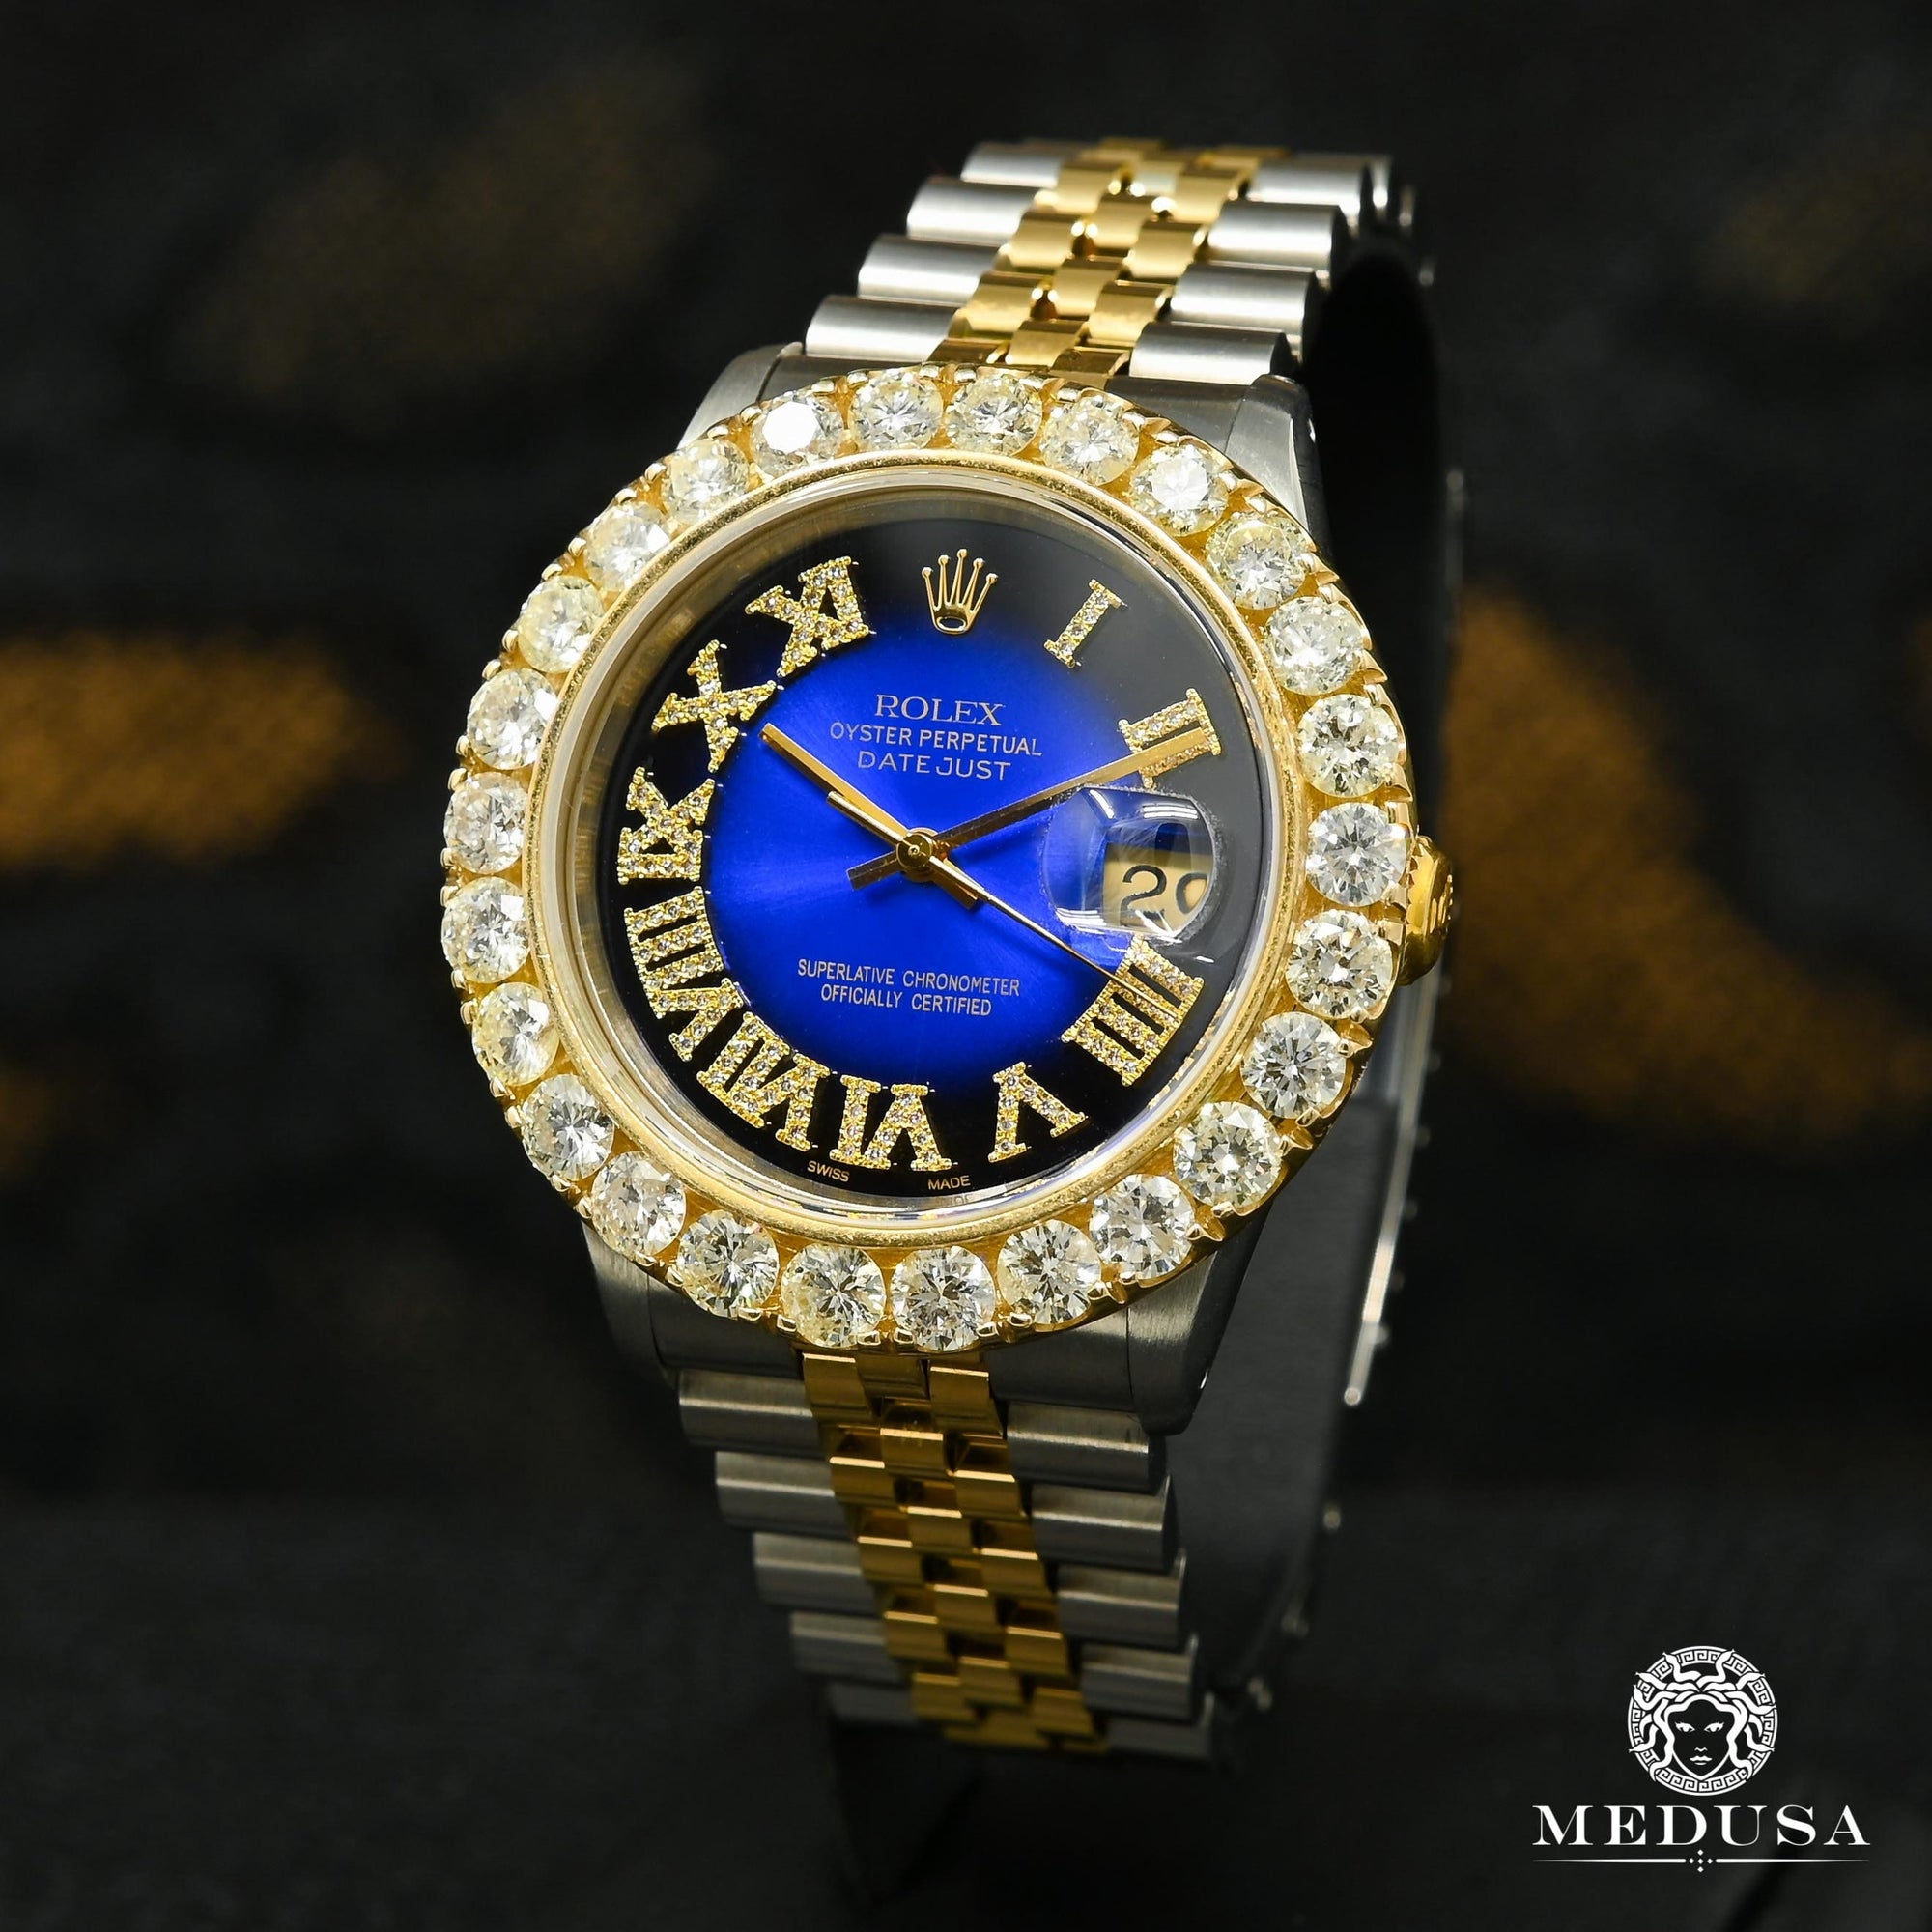 Rolex Watches | Collection of Certified Rolex Watches | Medusa jewelry